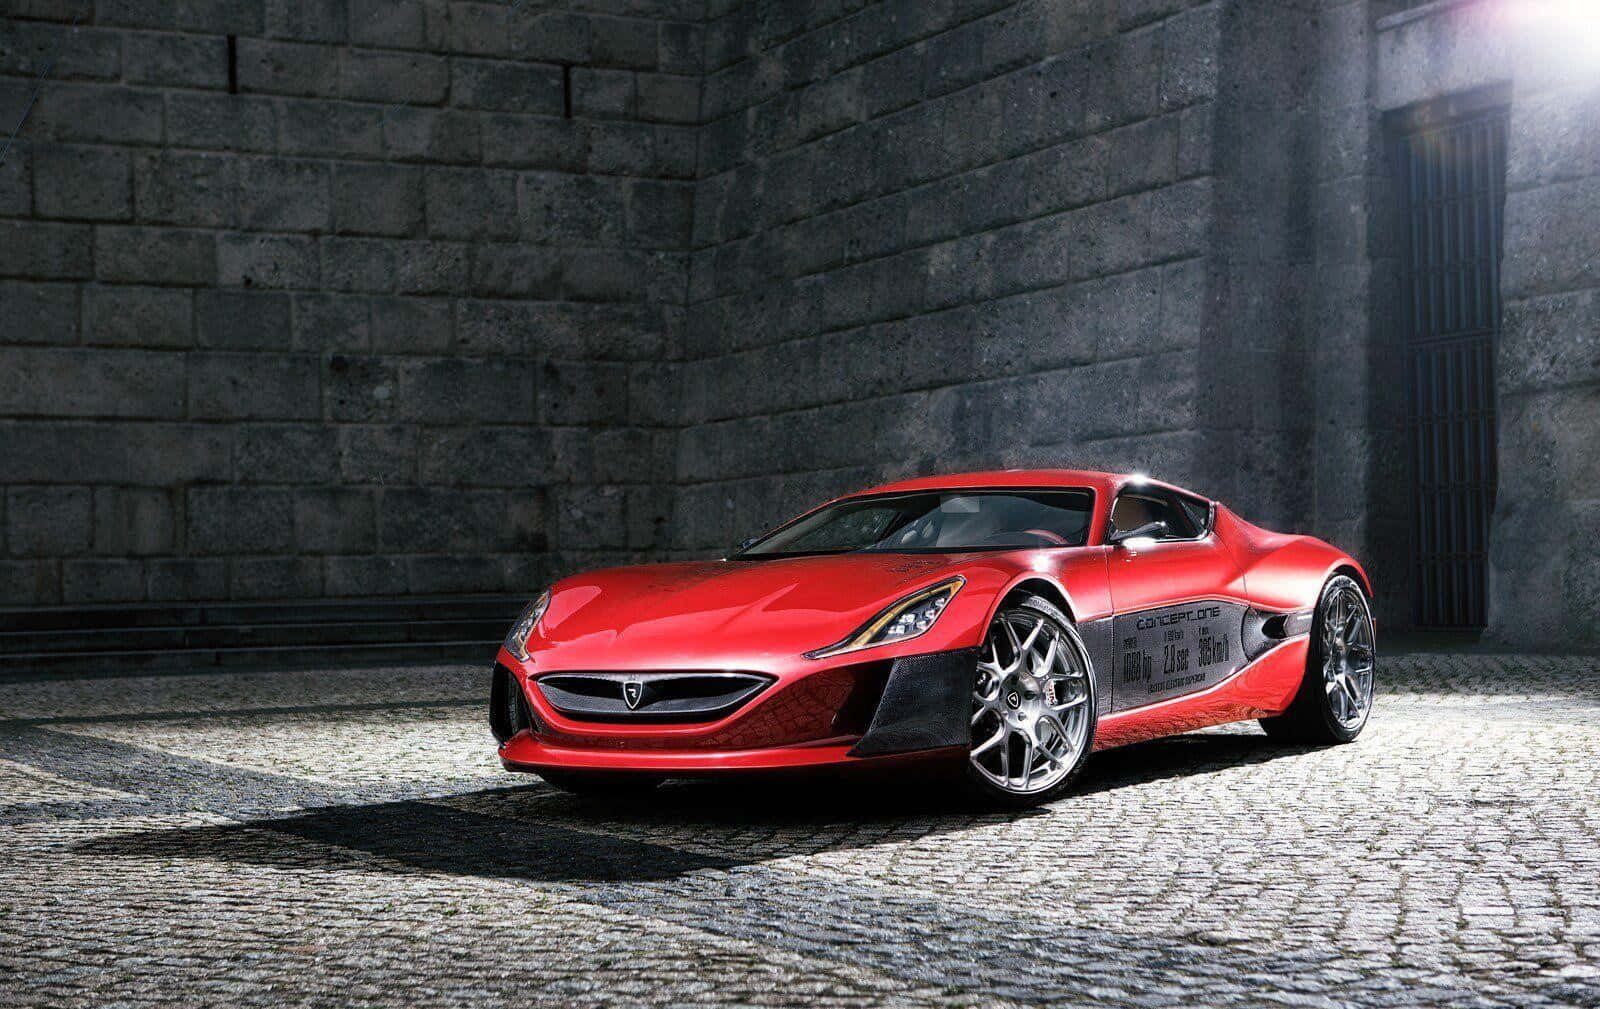 Stunning Rimac Concept One Electric Supercar Wallpaper